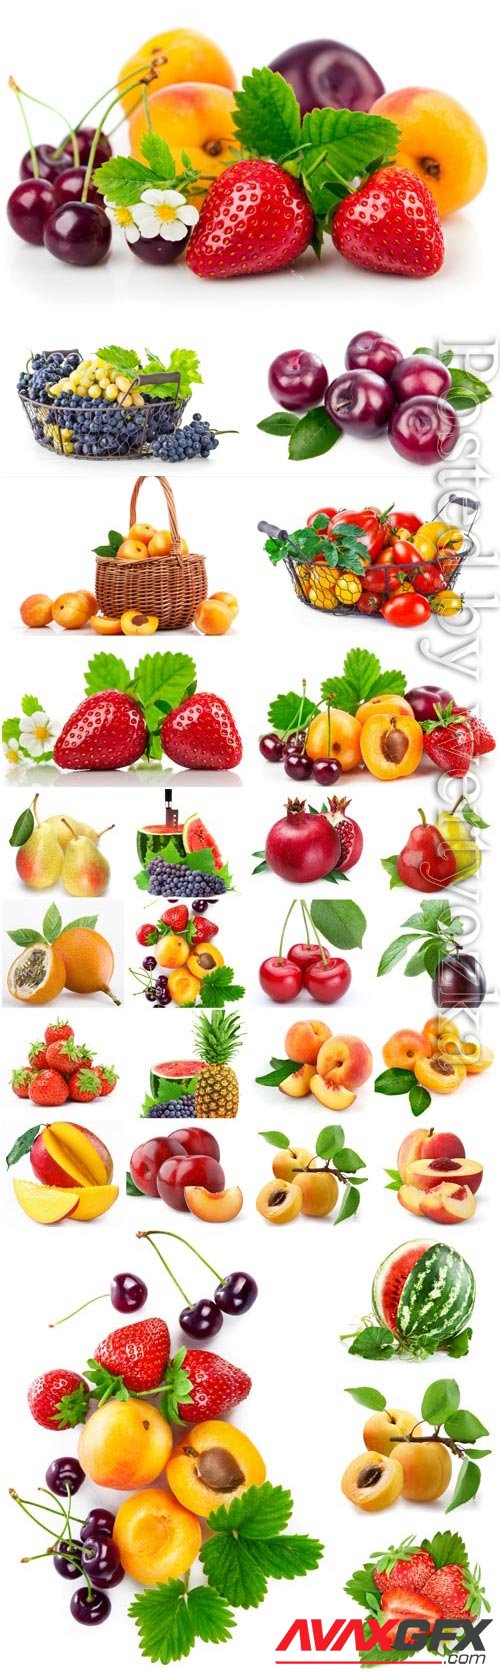 Set of fresh berries and fruits stock photo